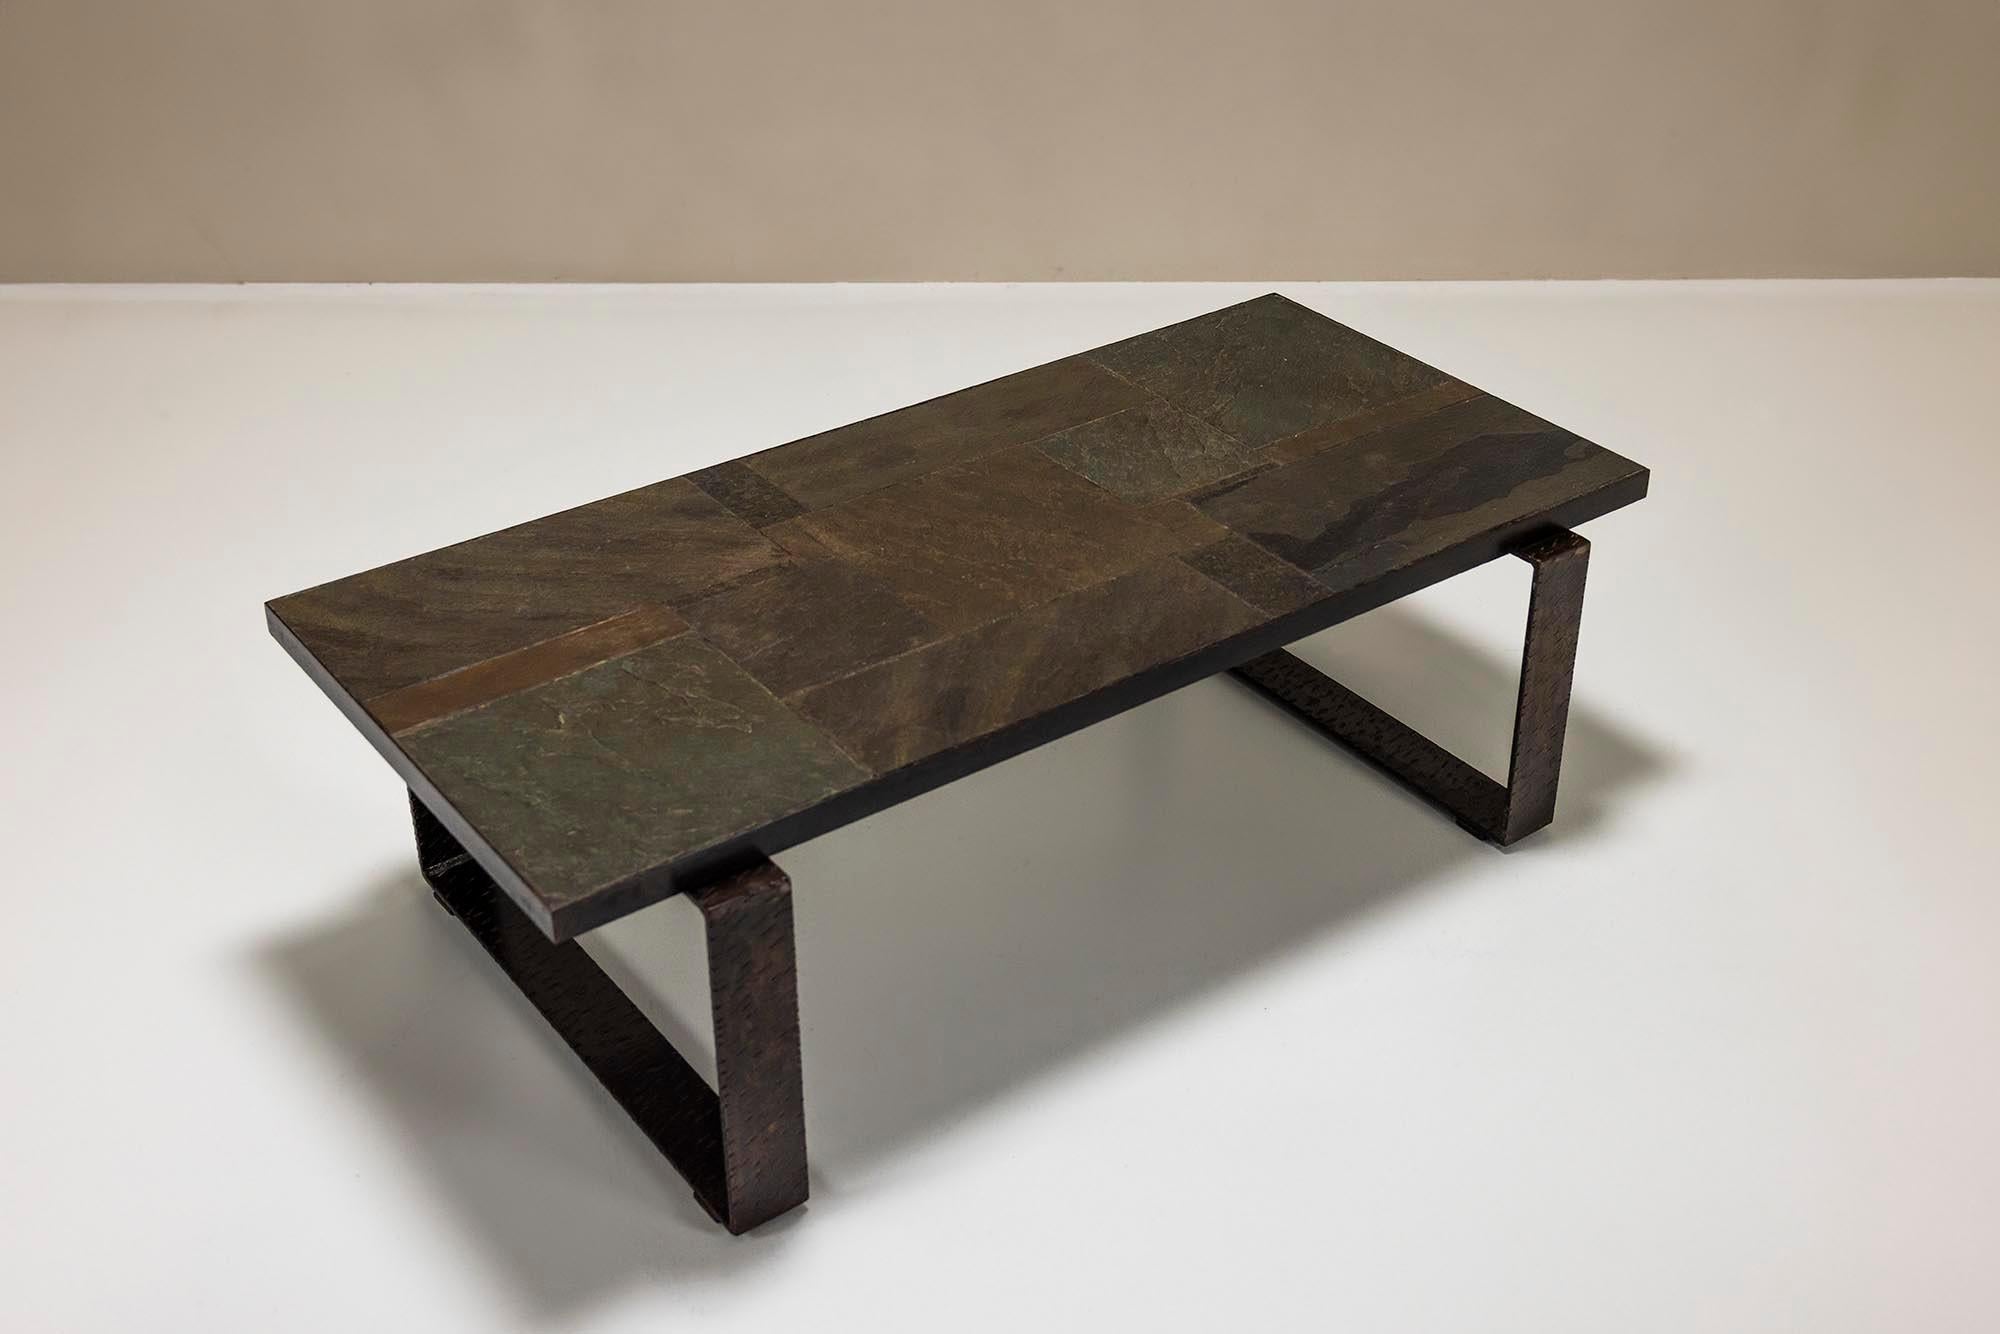 Paul Kingma Brutalist Coffee Table In Stone And Hammered Metal, Netherlands 1960 For Sale 1